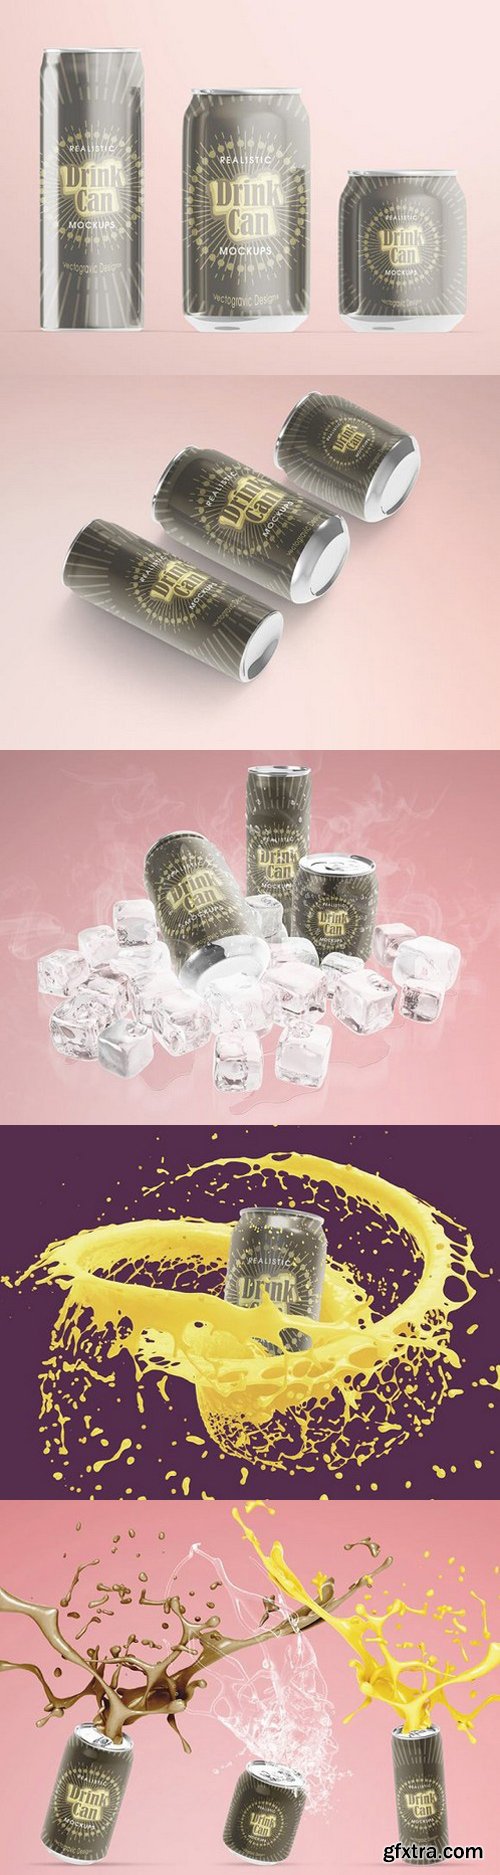 CM - Realistic Drink Can Mockups 884681